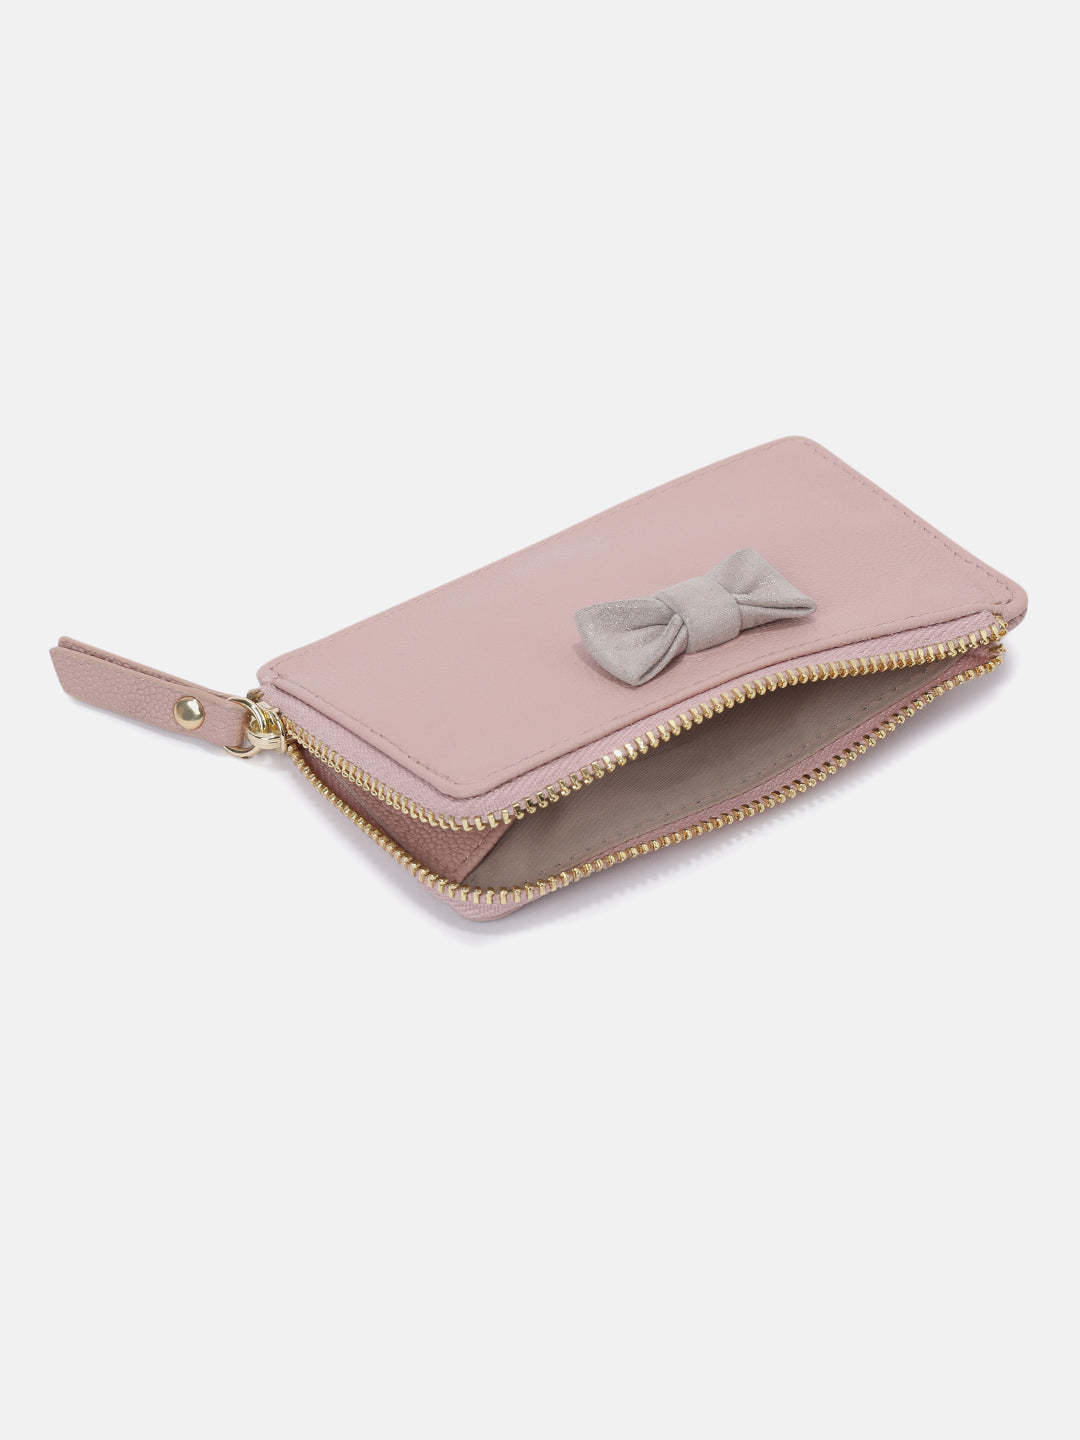 Belle Bow Card Case - Pink